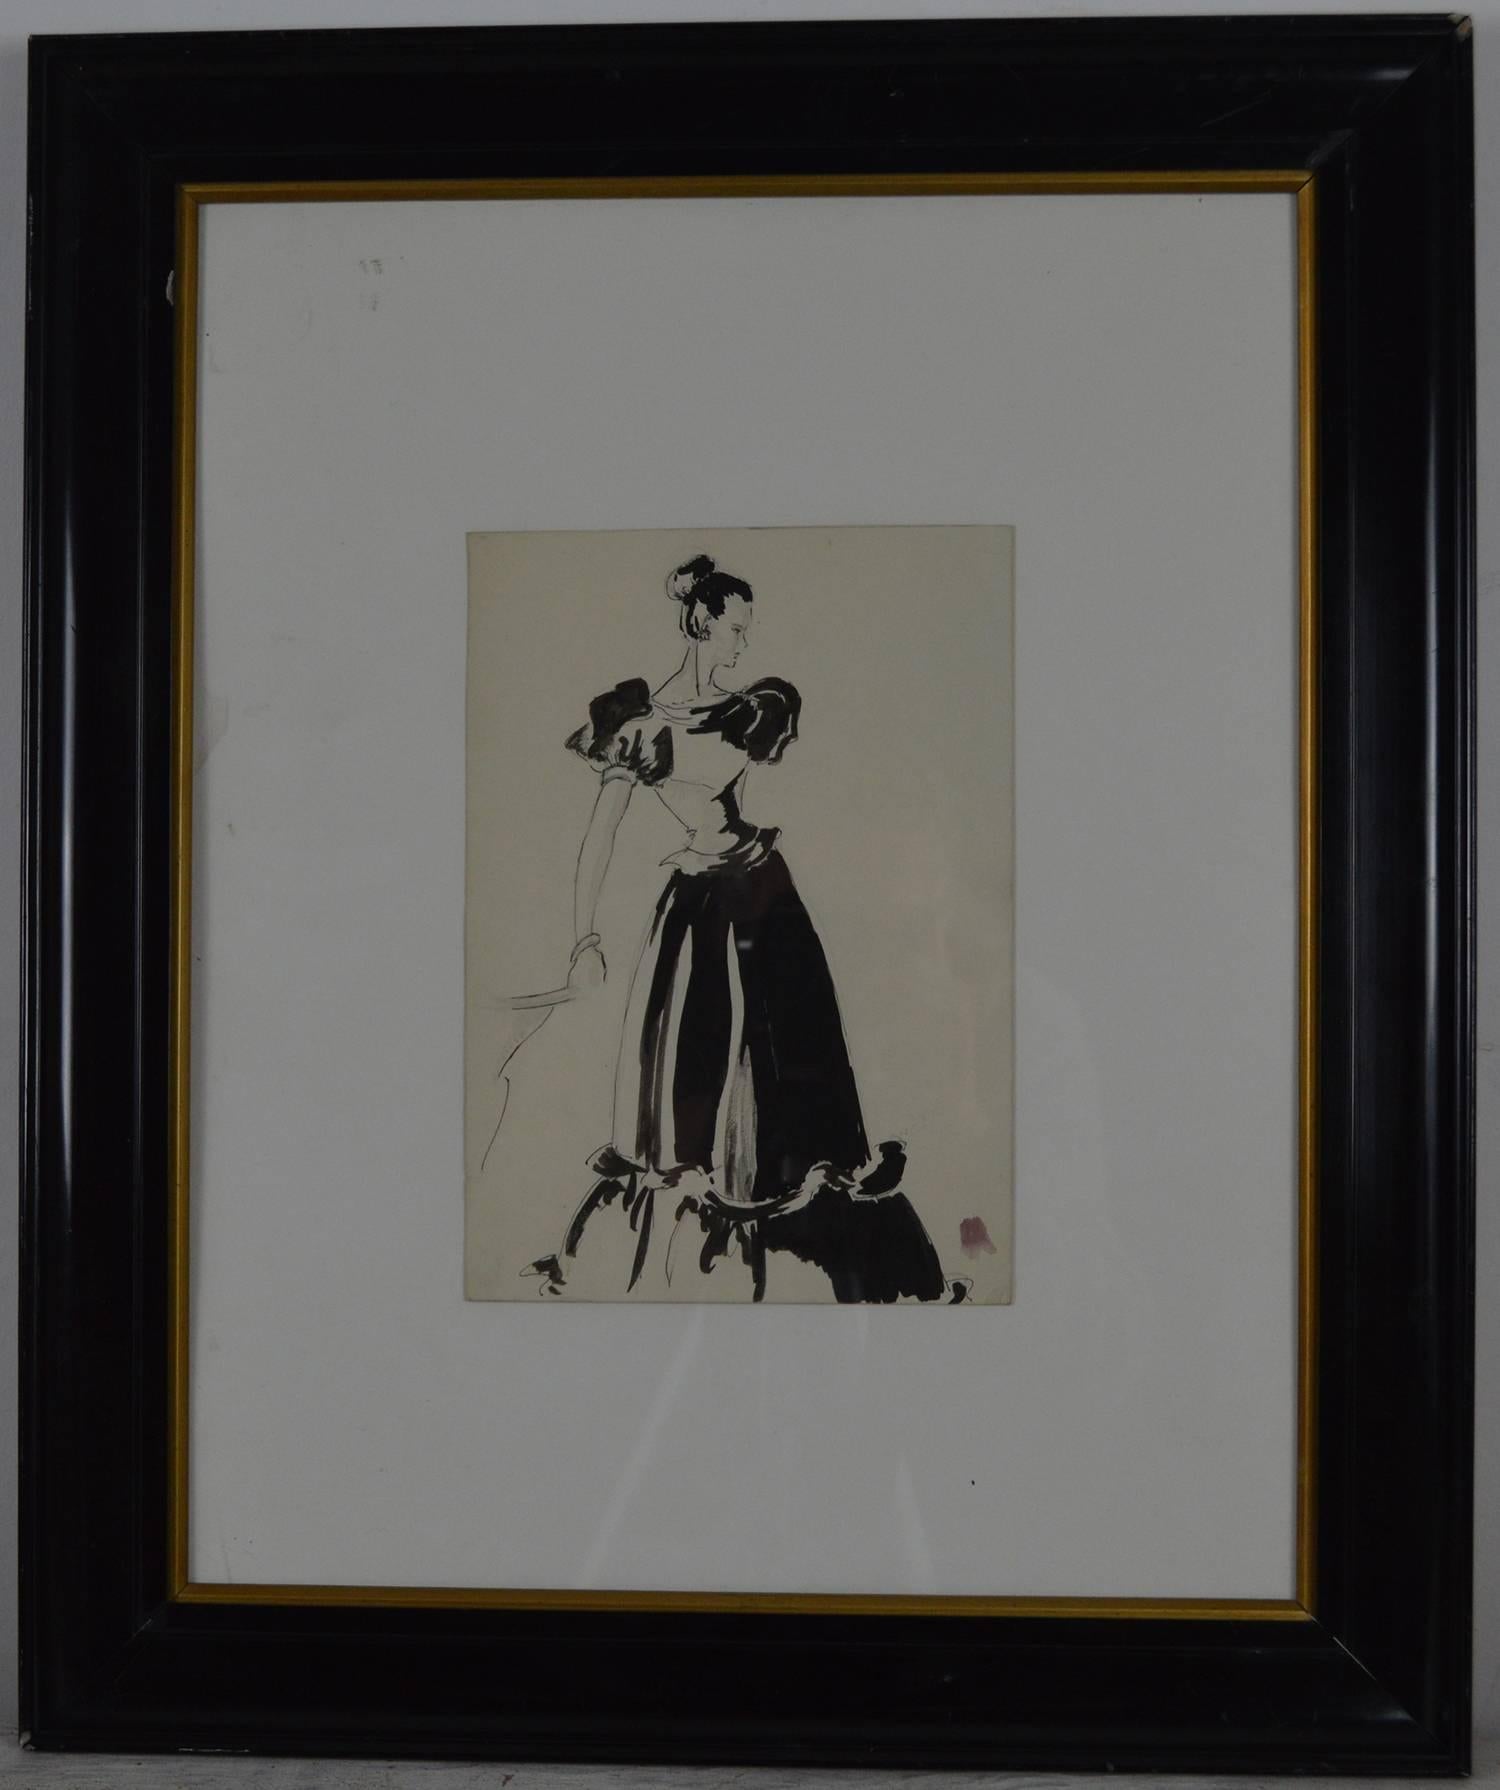 Wonderful pen and ink drawing by Pat Kerr, 1946. So evocative of the 1940s.

On card. Unsigned.

Presented in the original black lacquer frame.

Drawn for A & C Kay, New Bond St, London.

  

